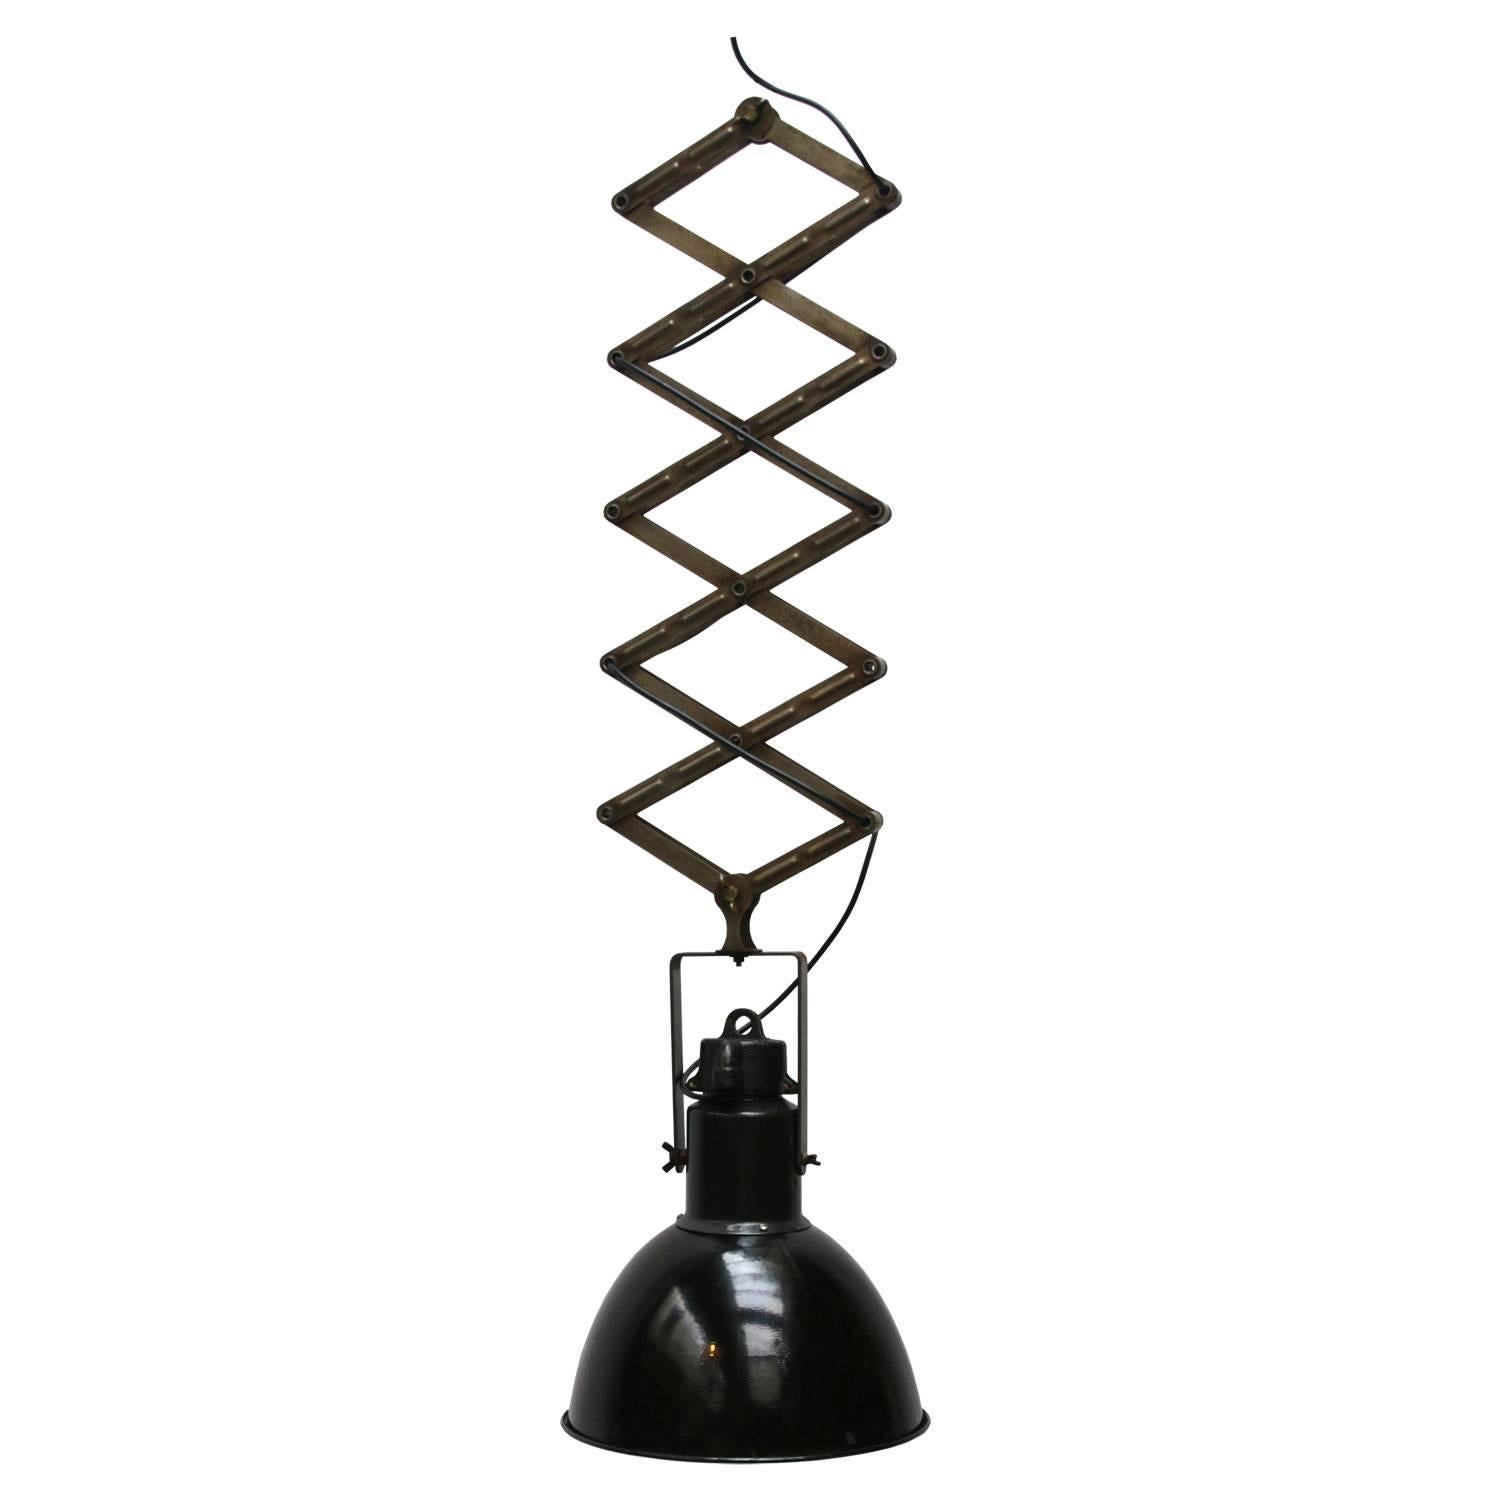 Scissor spring with industrial hanging lamp. 
Black enamel white interior. Max. length 250cm. Min. length 80cm.

Measure: Weight 6.5 kg / 14.3 lb

Priced per individual item. All lamps have been made suitable by international standards for